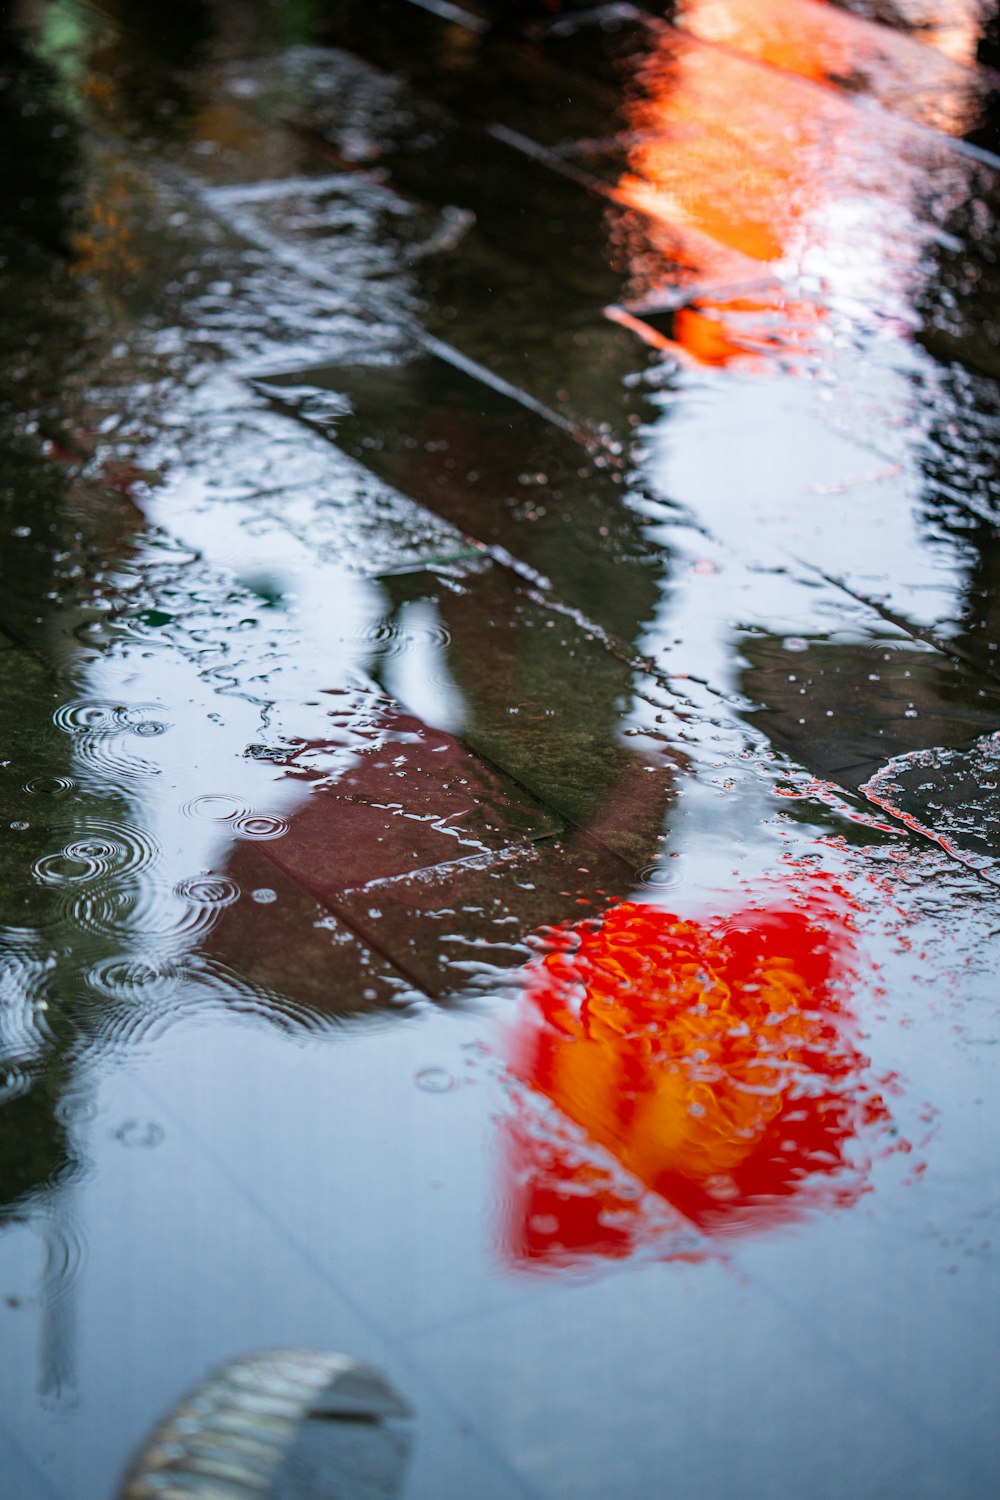 a reflection of a red flower in a puddle of water